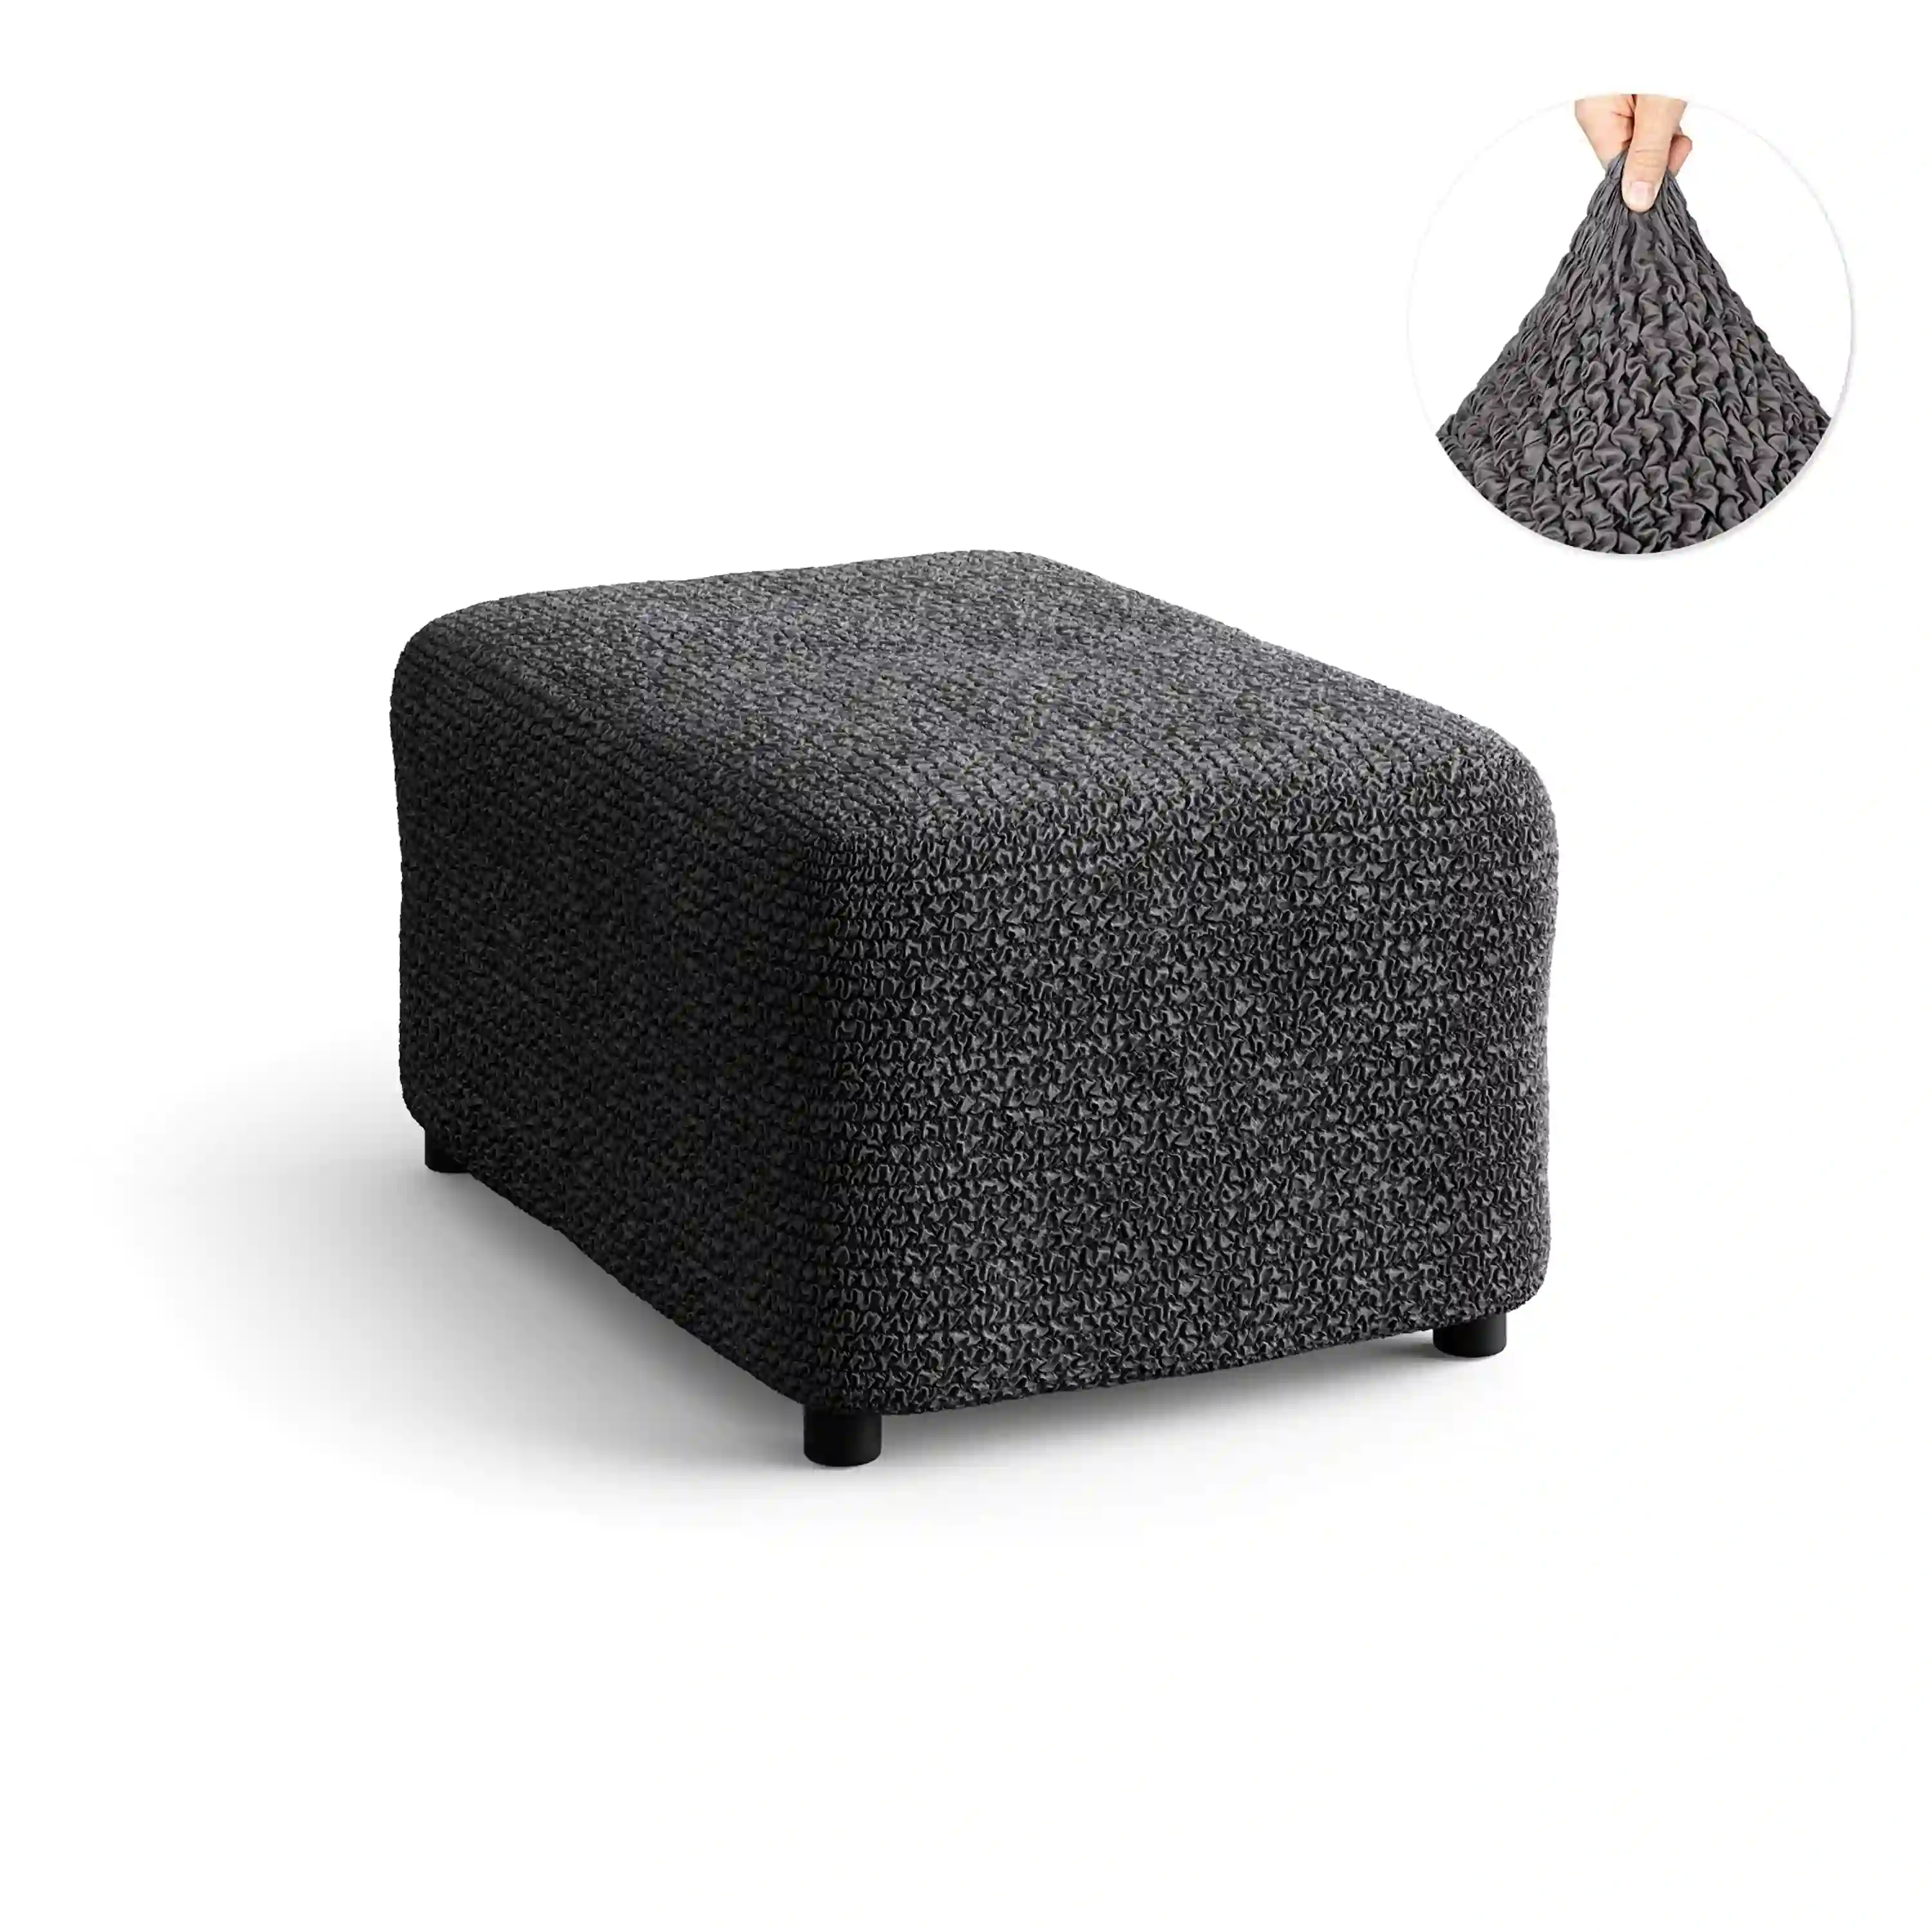 Footstool Cover - Charcoal, Microfibra